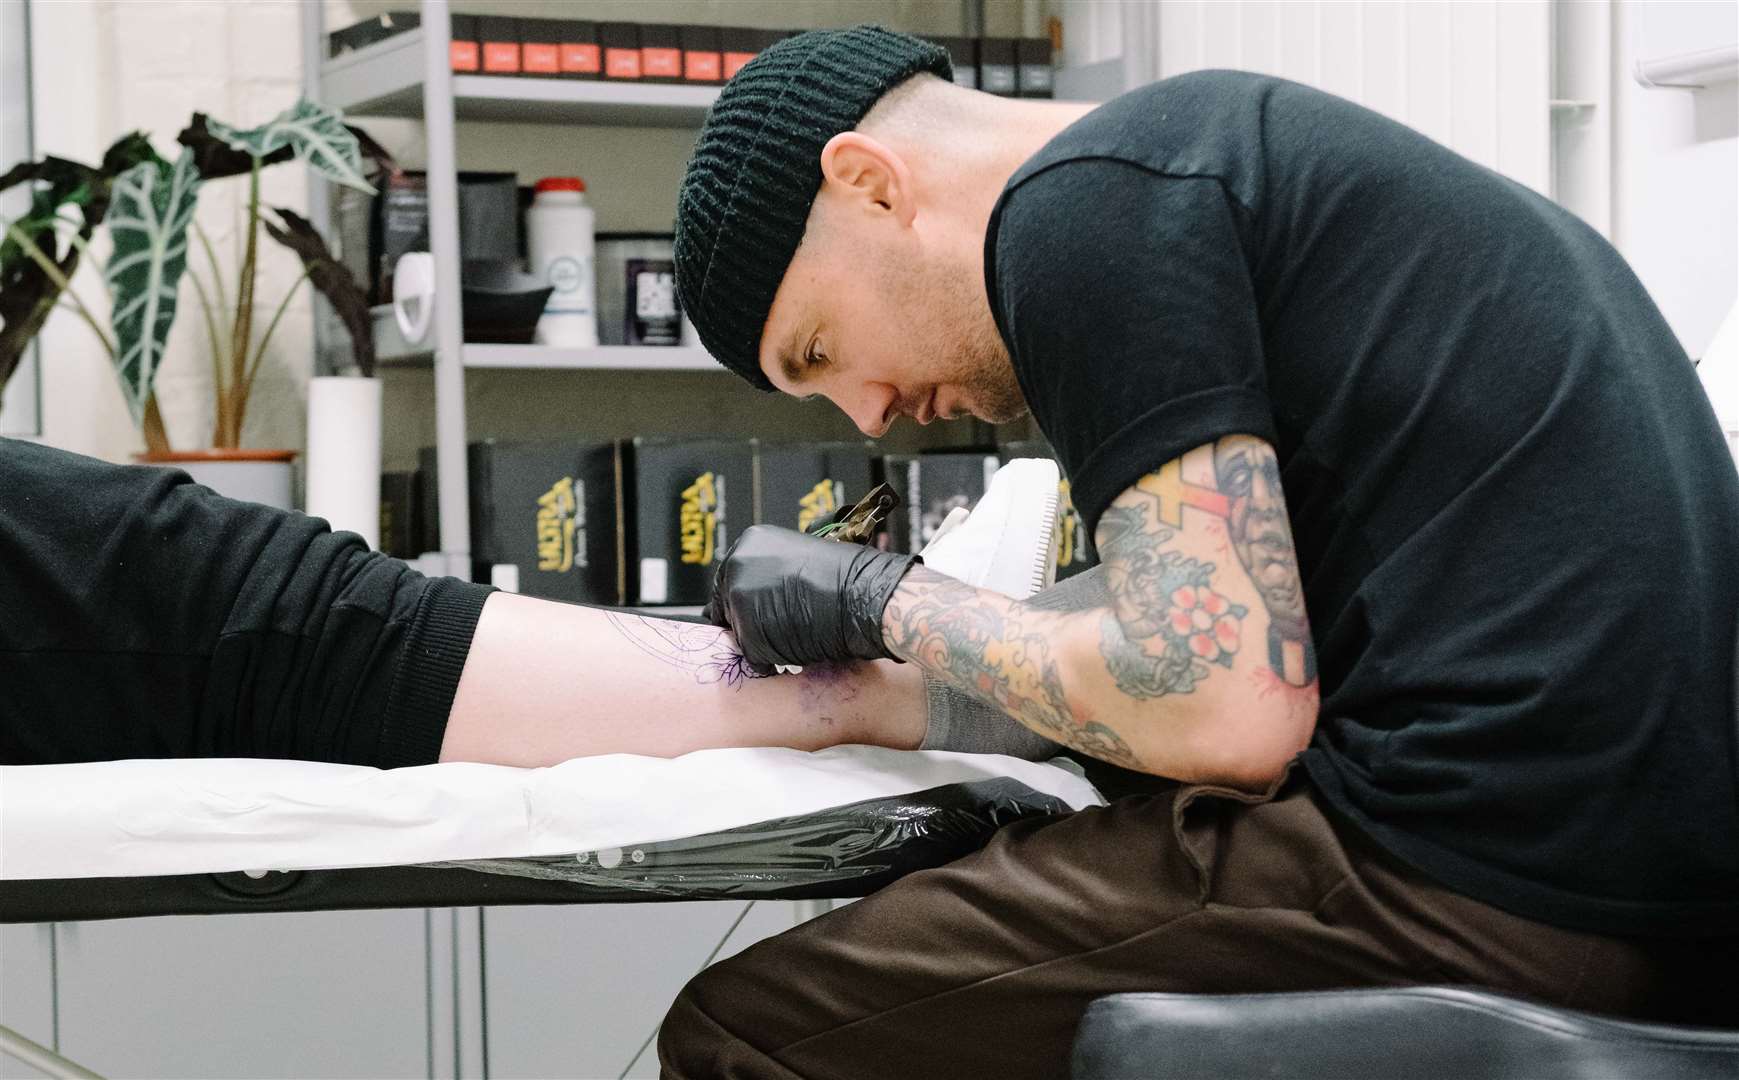 There’s no denying the talent of tattoo artists...but our columnist remains unconvinced. Picture: Joshua Atkins